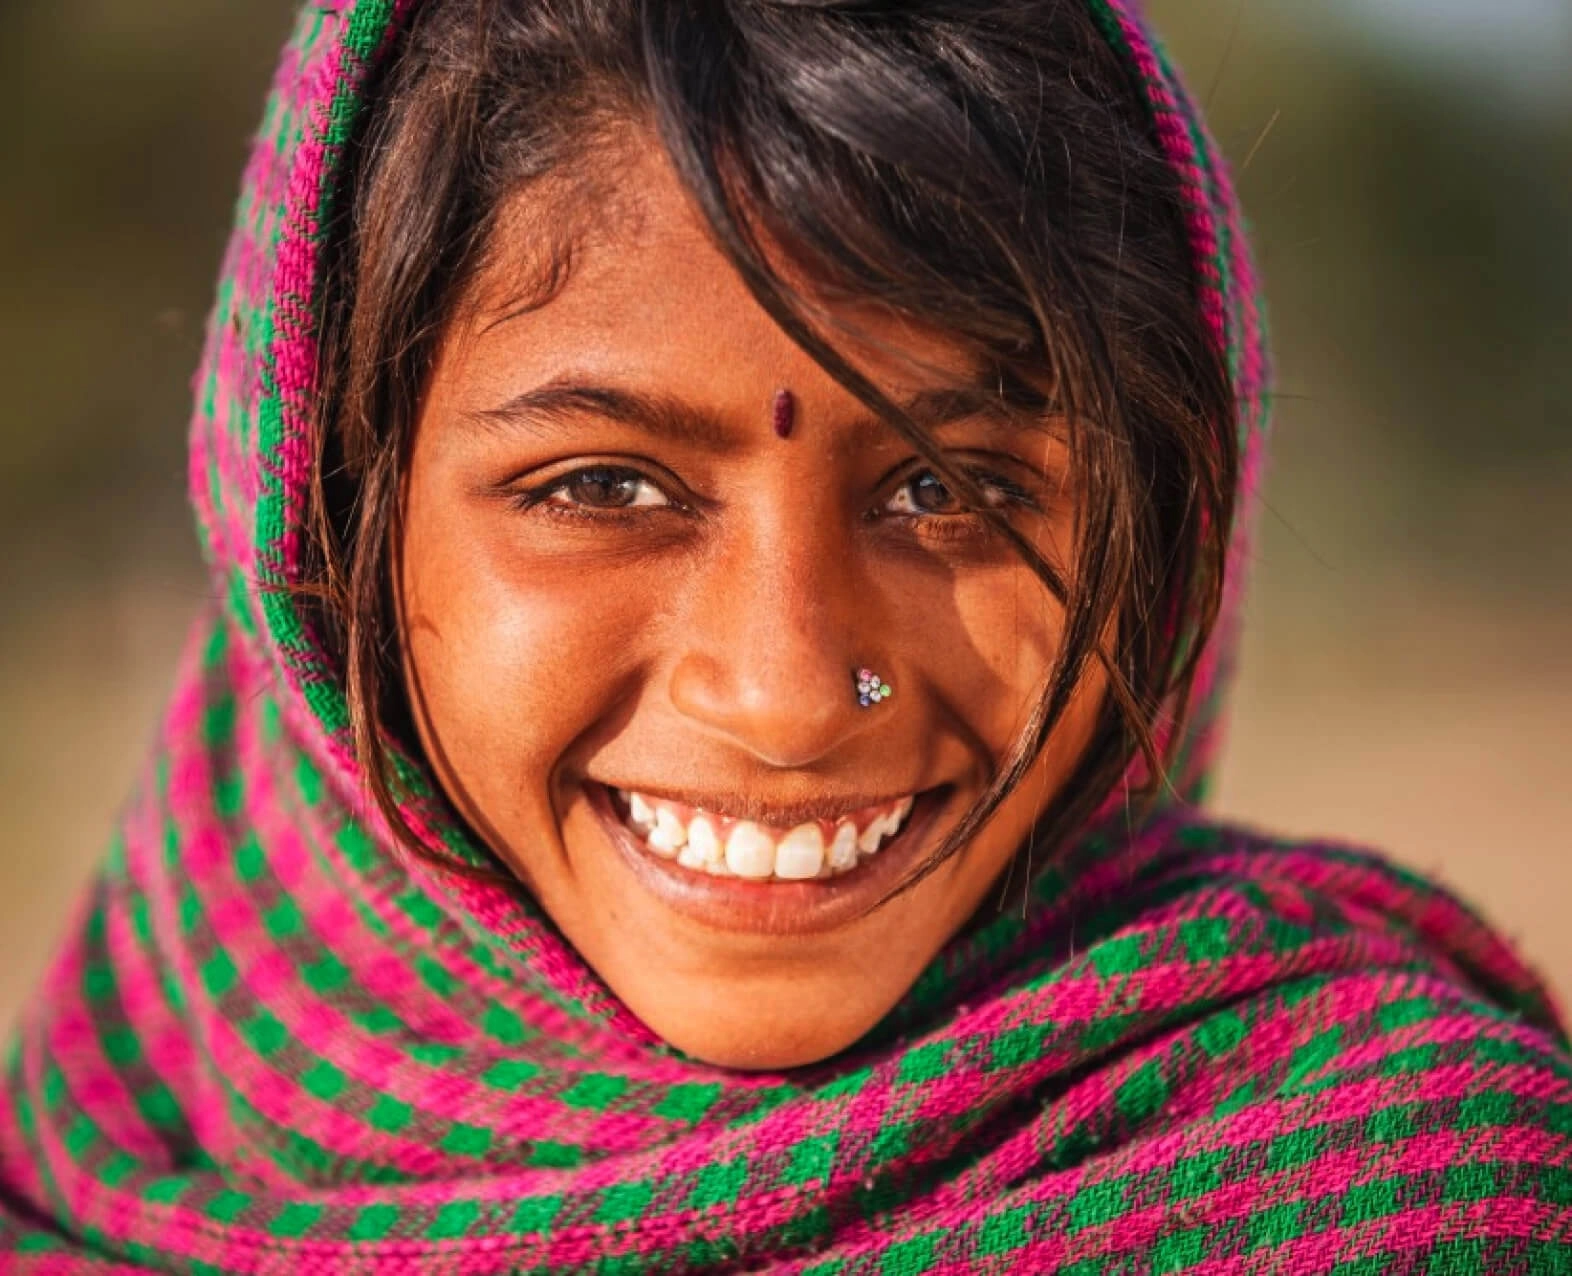 A close-up of a smiling girl wearing a colorful scarf with a bindi on her forehead. (photo)